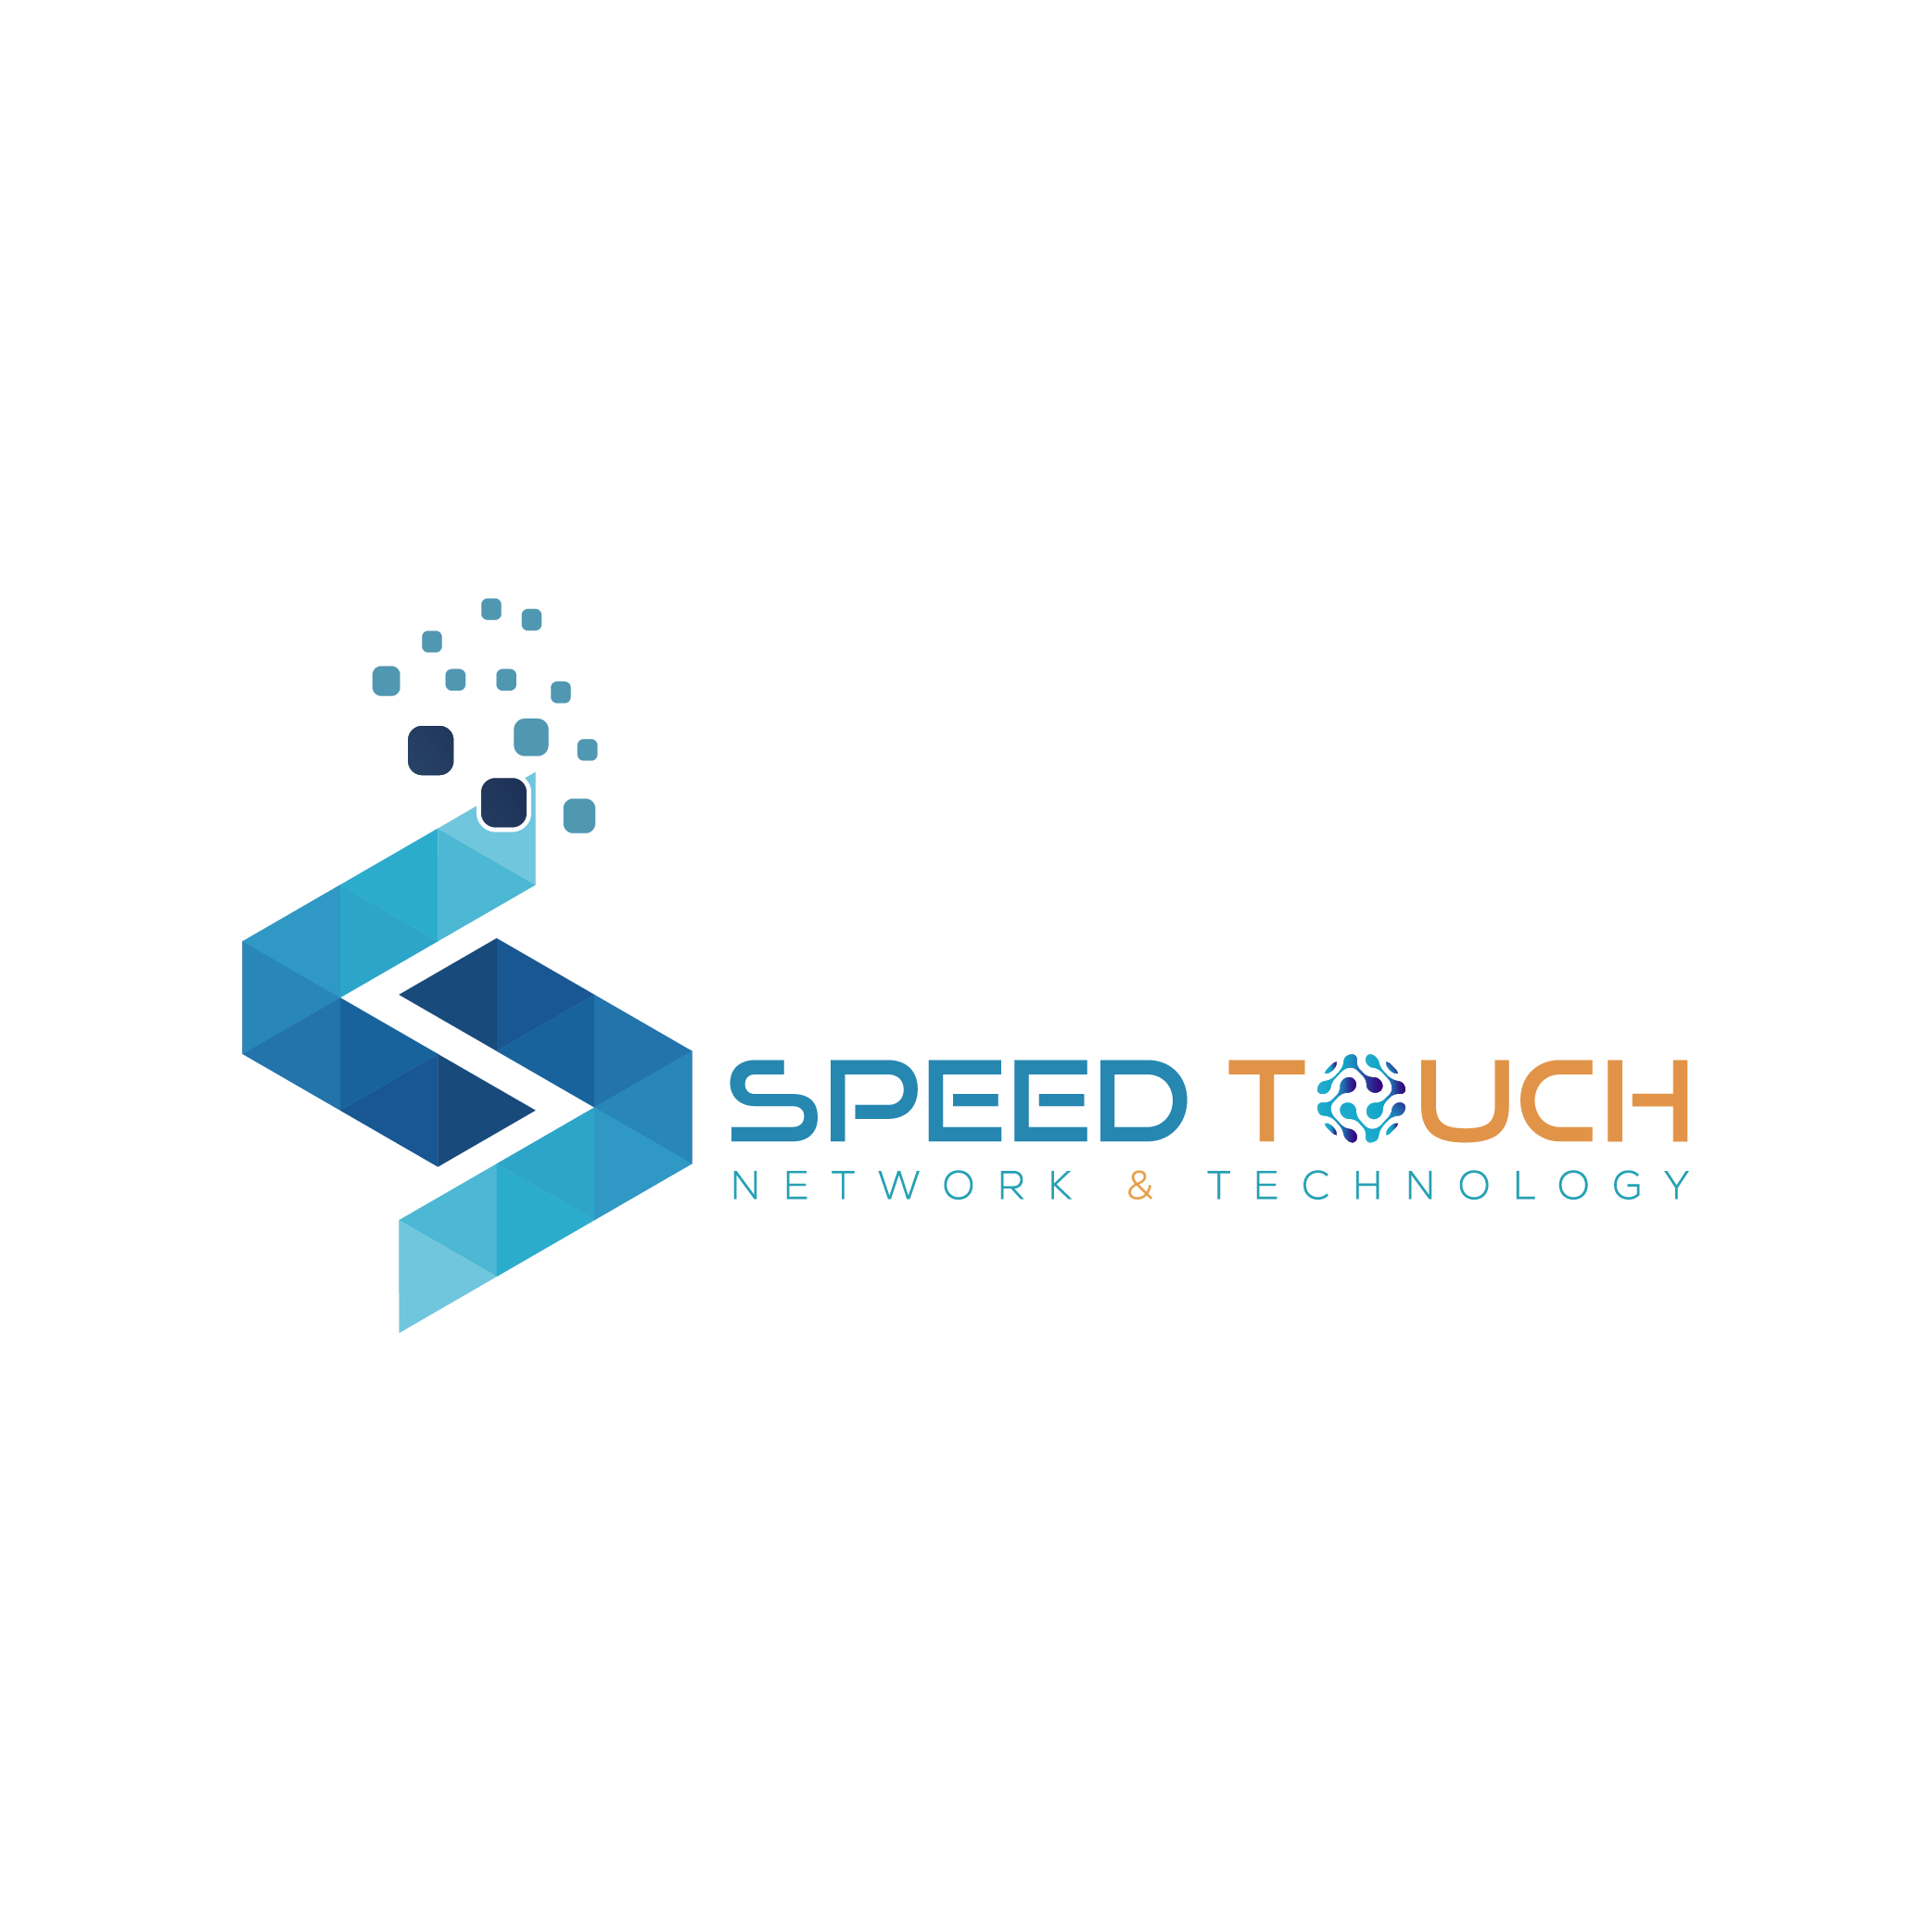 Speed touch network & technology -logo